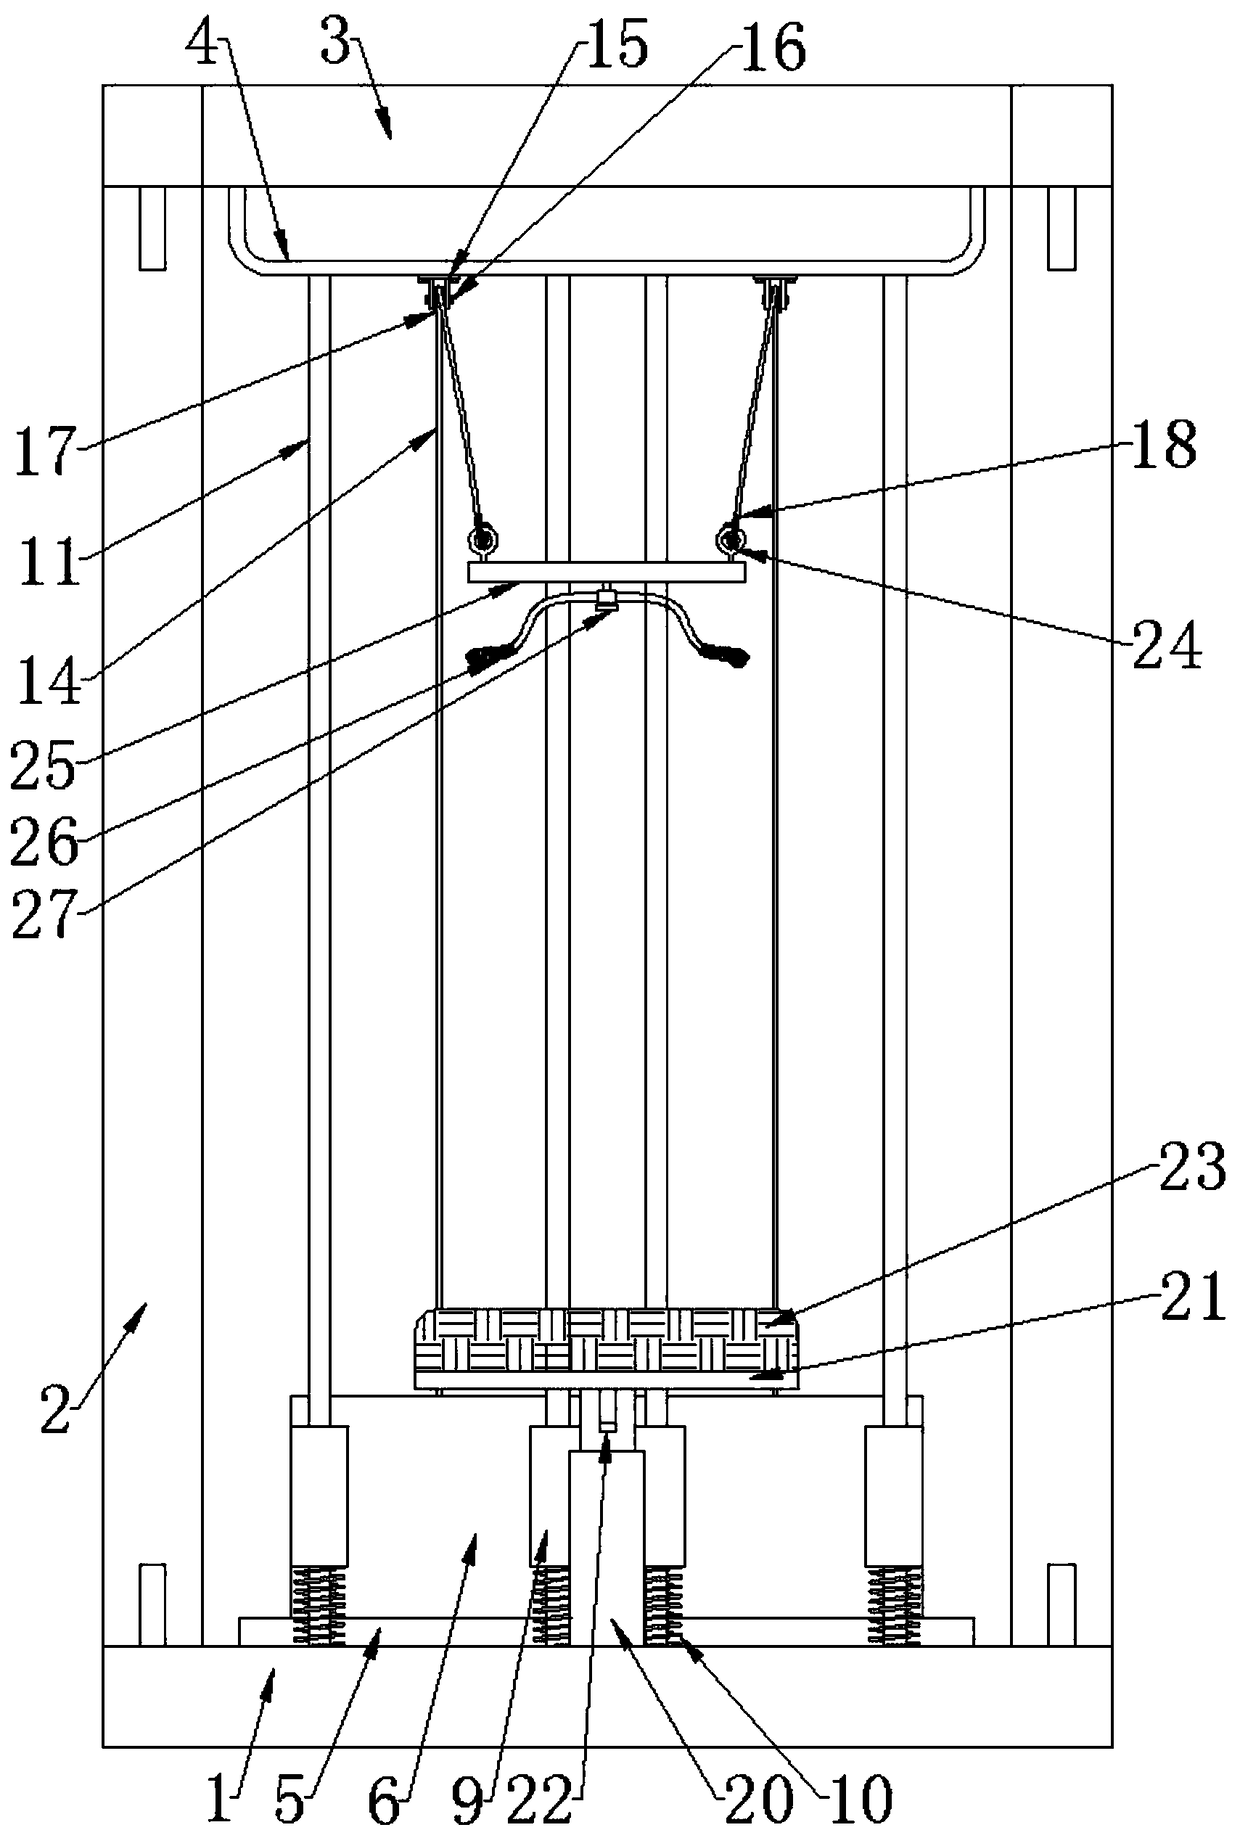 A strength exercise device and a method of using the same